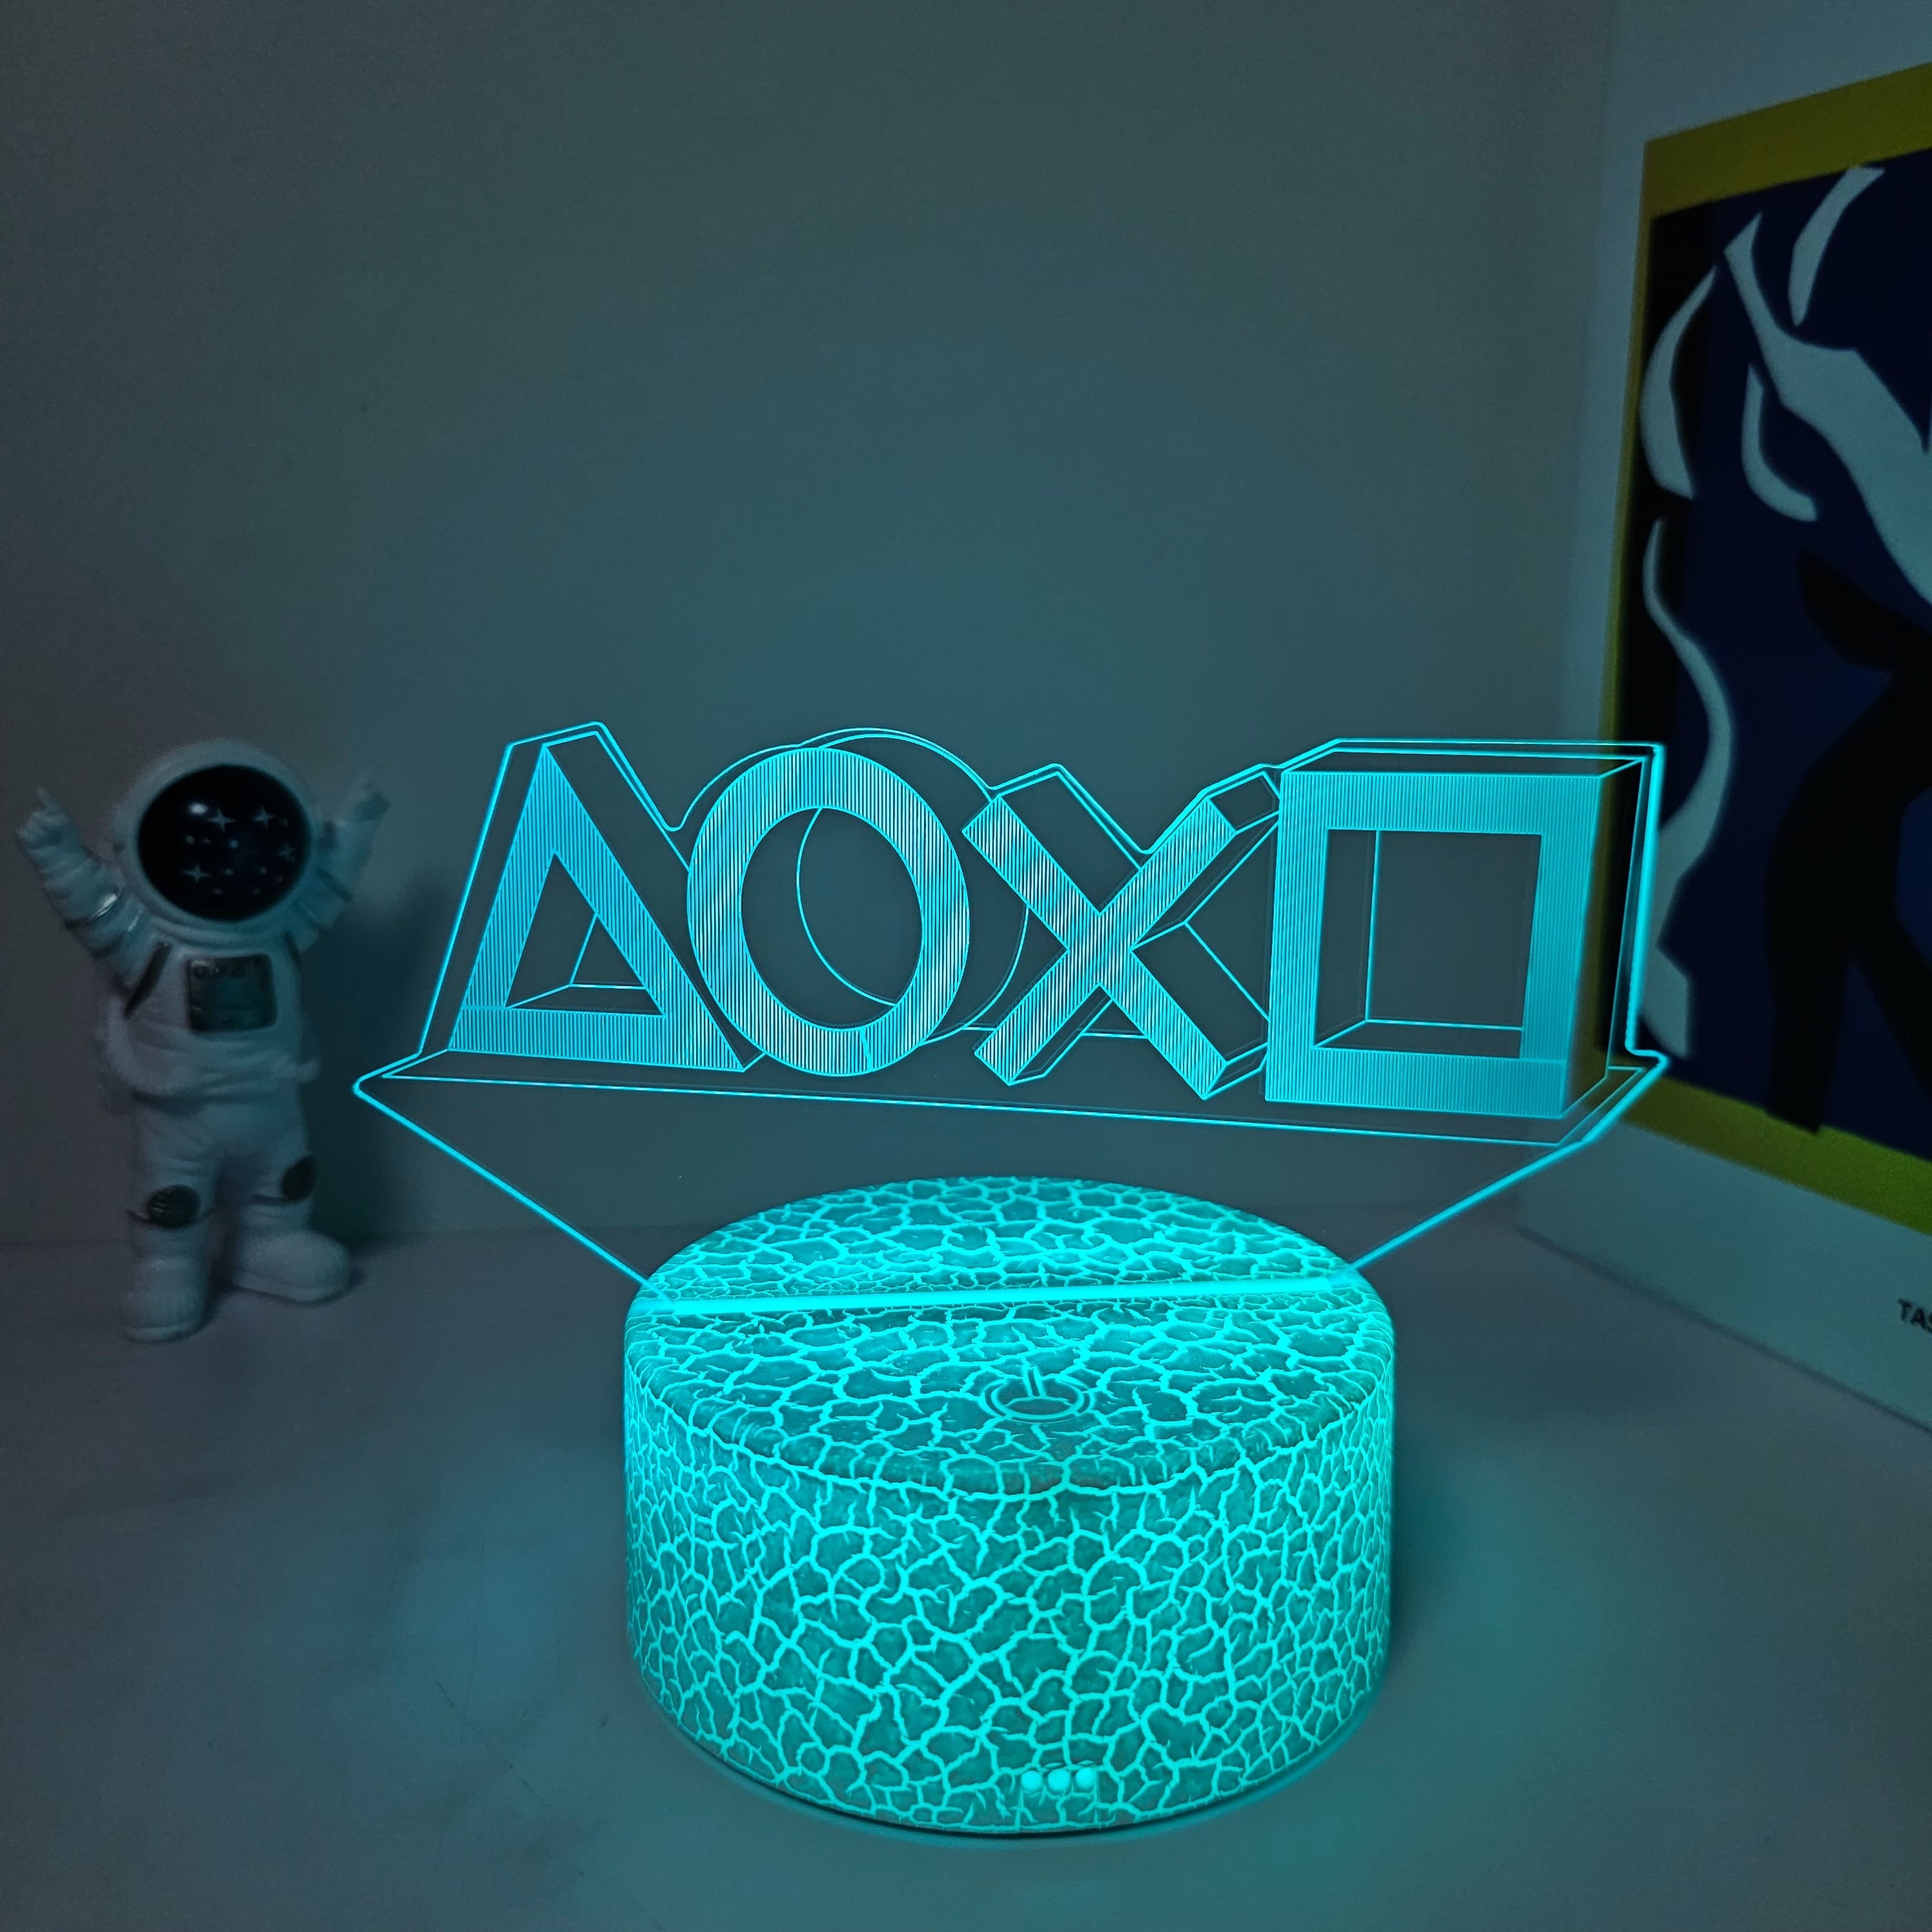 

3d Gaming-inspired Led Night Light With Touch Control - 7 Color Modes, Perfect For Gaming Room Ambiance & Living Room Decor, Usb/battery Powered, Great Gift Idea